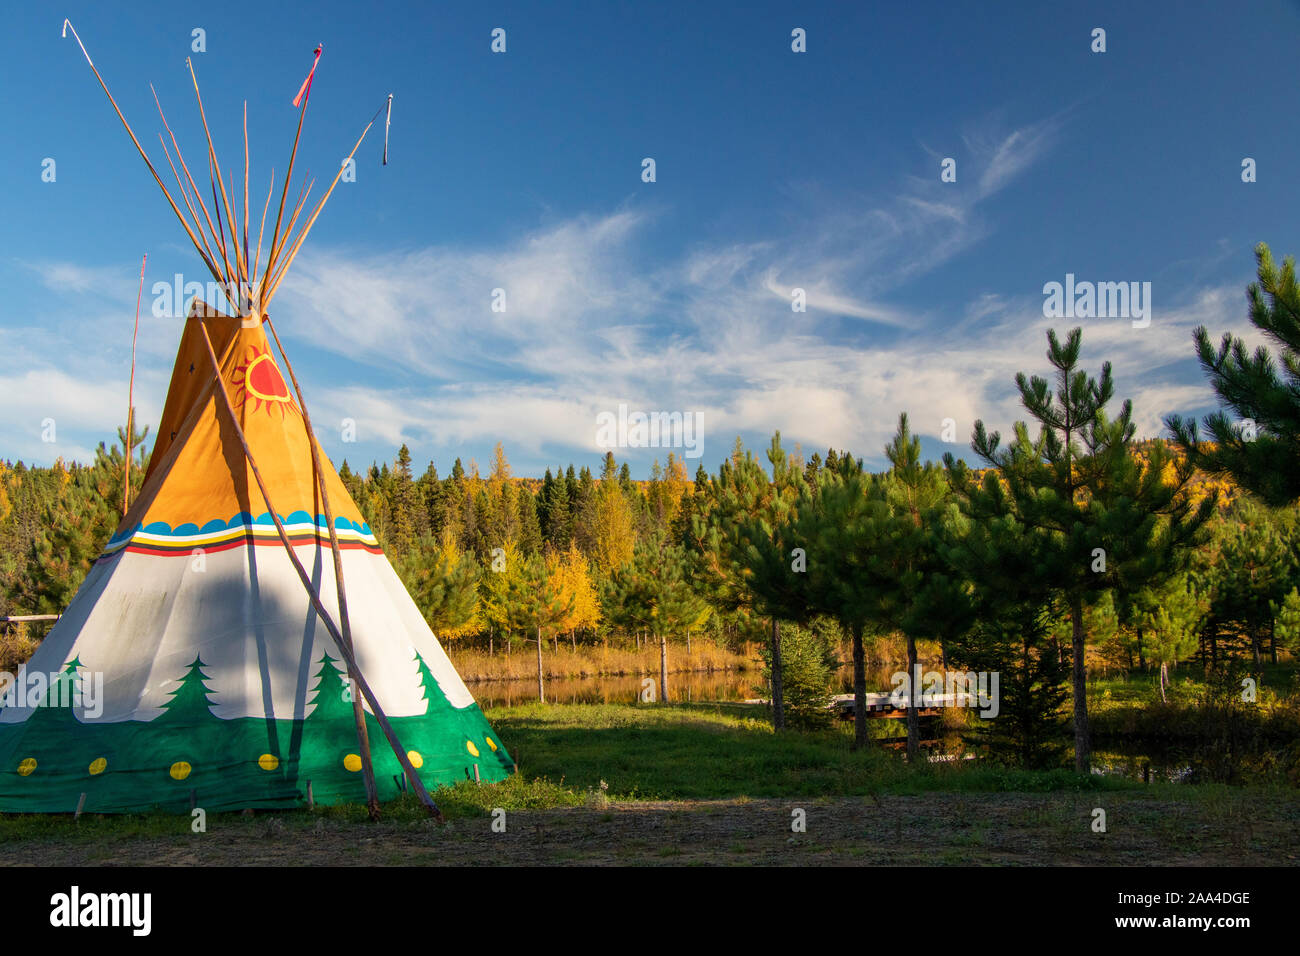 La Bostonnais (La Tuque), Québec, Canada - October 11, 2019 : Painted Tipi Teepee with Autumn Foliage in background, Domaine Notcimik, Mauricie Stock Photo